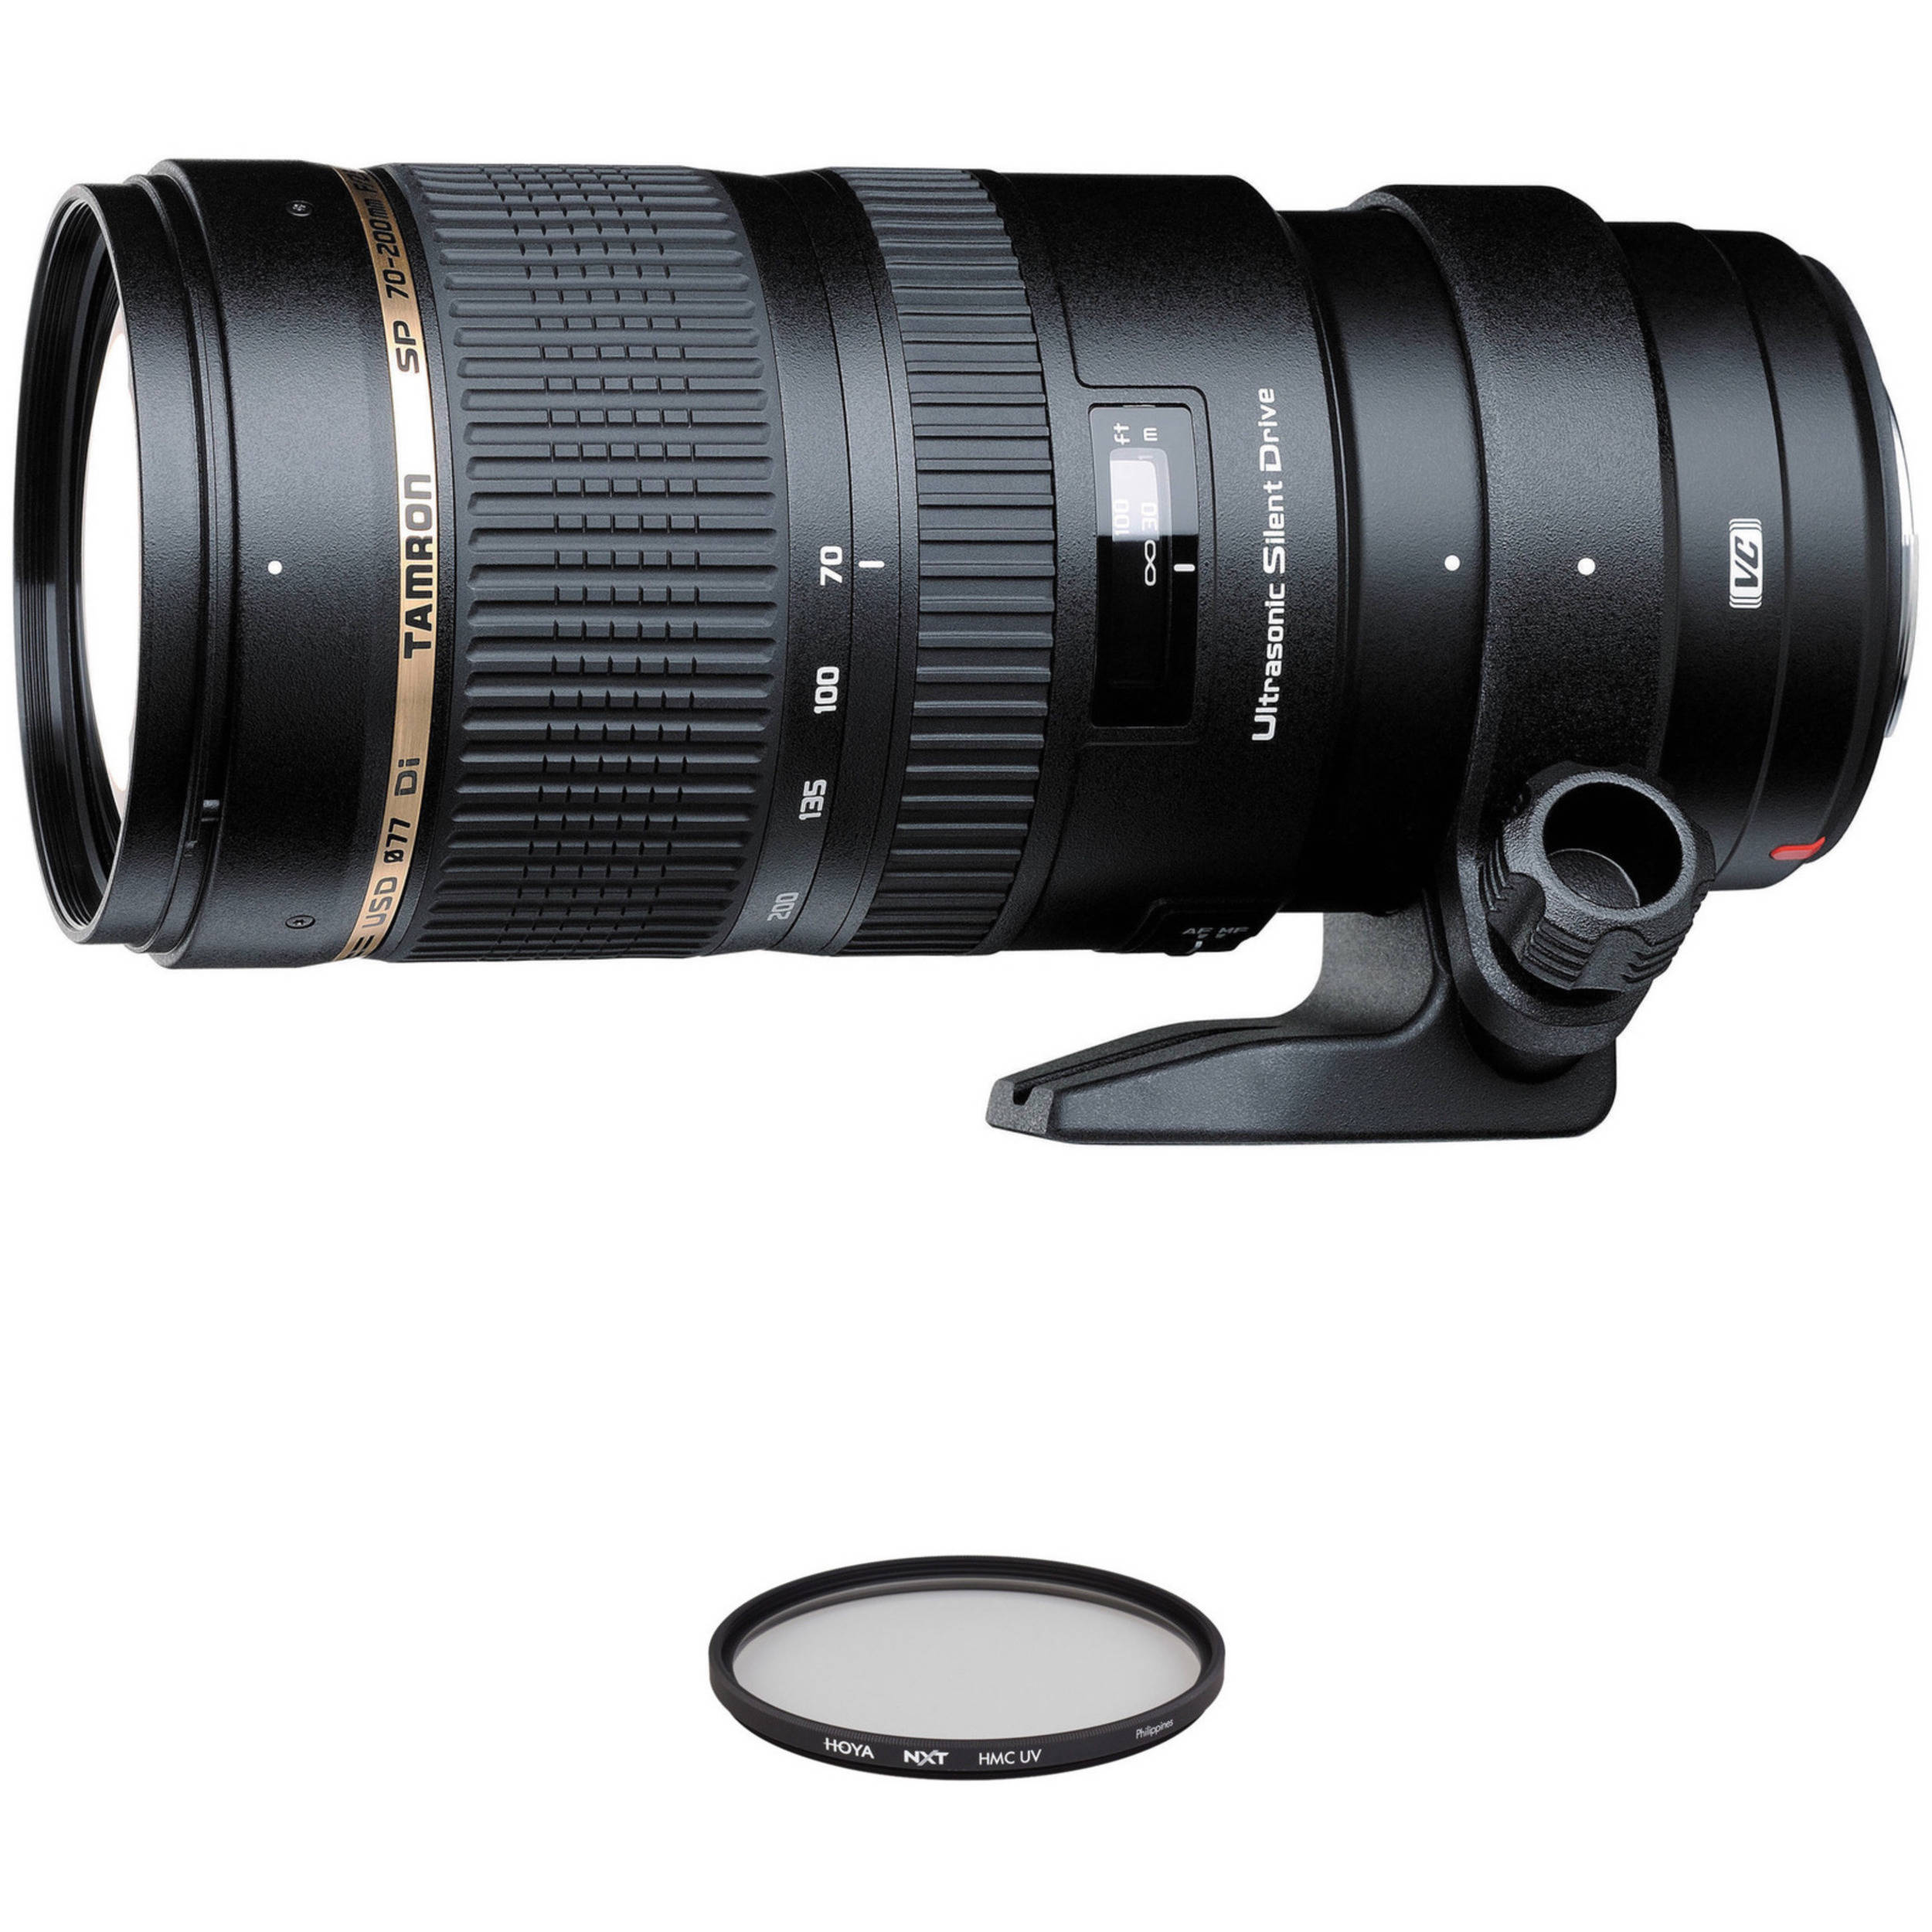 Tamron Sp 70 0mm F 2 8 Di Vc Usd Lens And Filter Kit For Canon